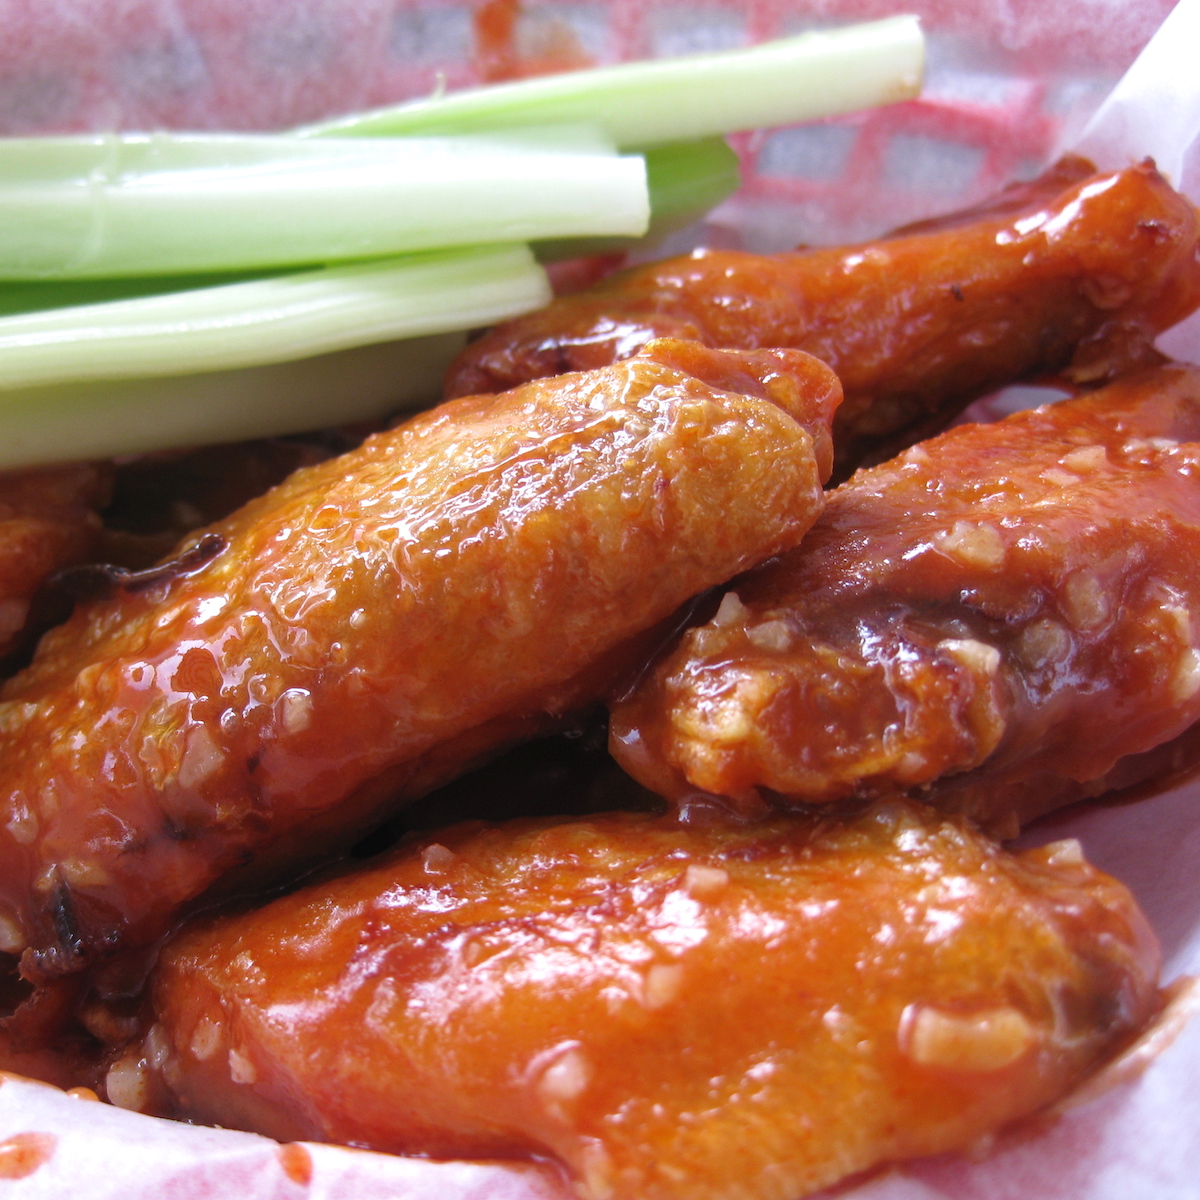 Buffalo Wings from Scotty's Landing in Coconut Grove, Florida